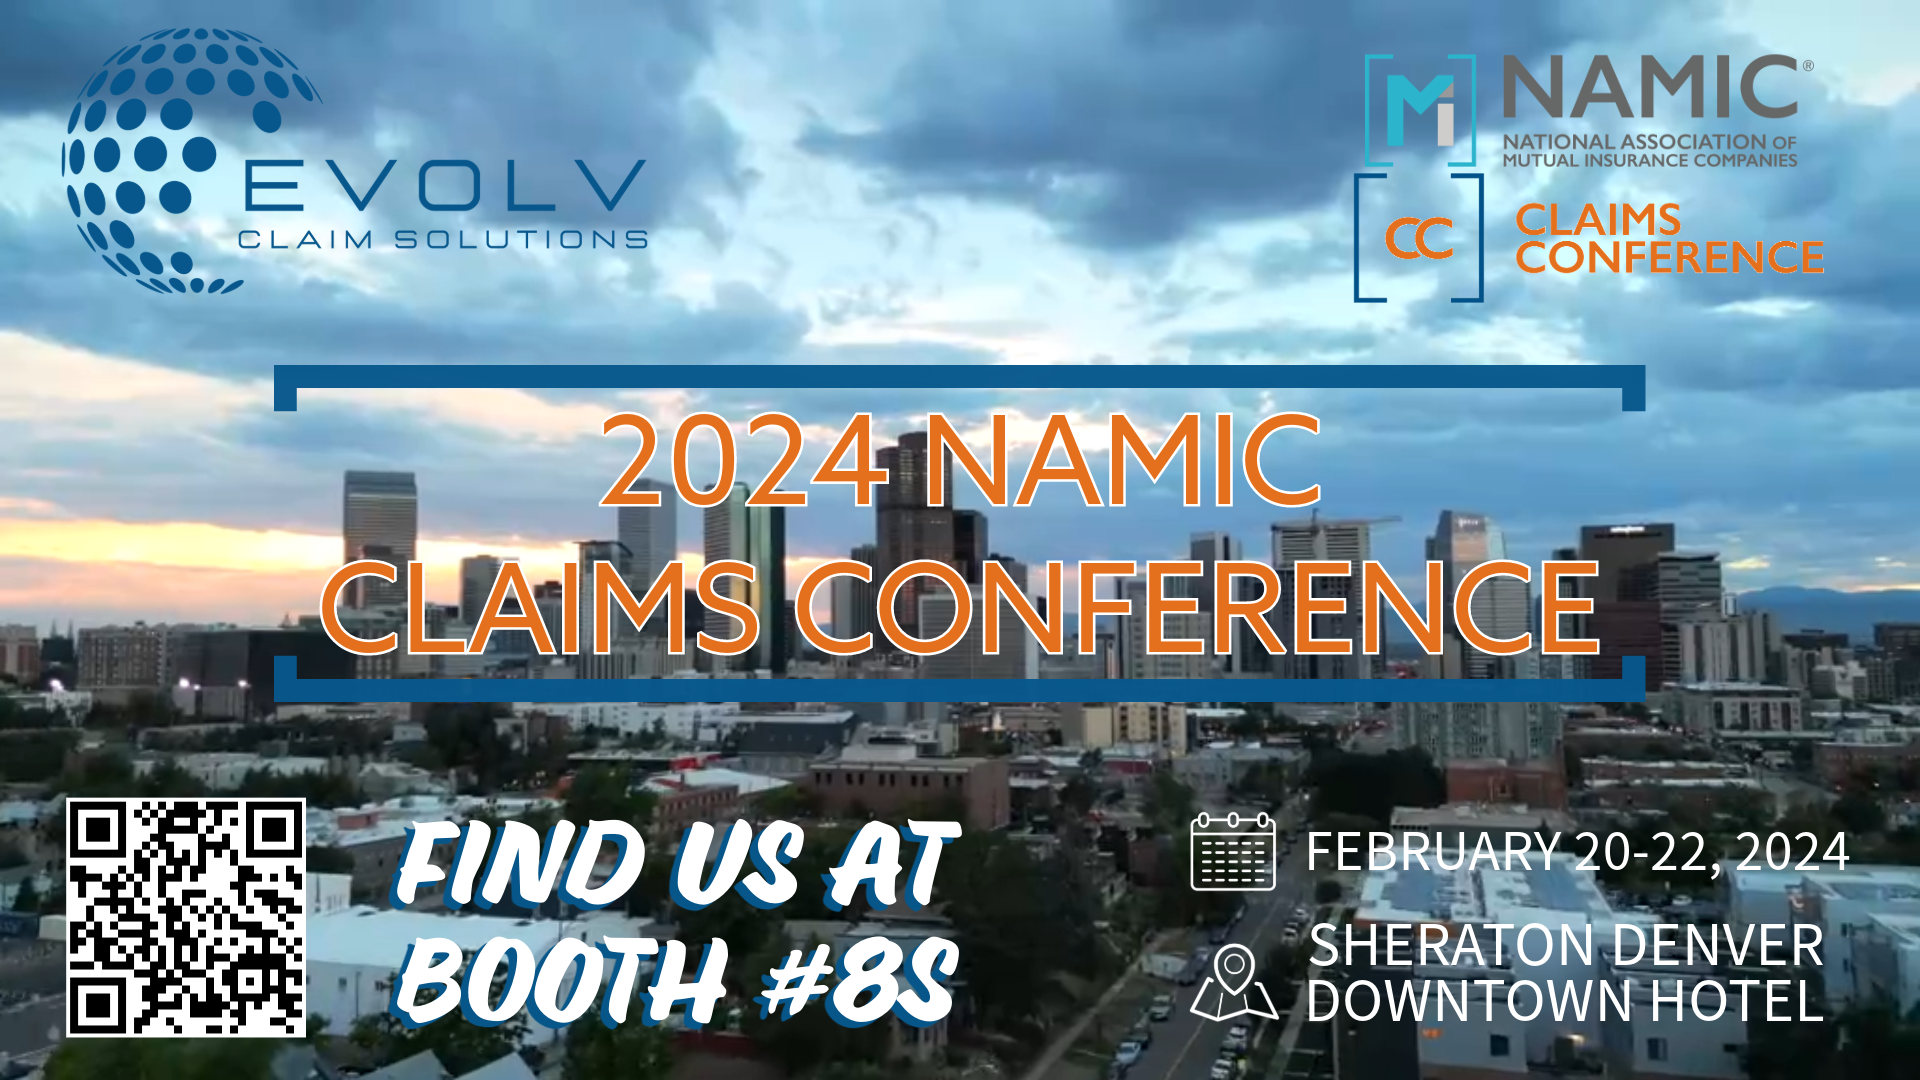 Evolv Claim Solutions will be at N.A.M.I.C Claims Conference!